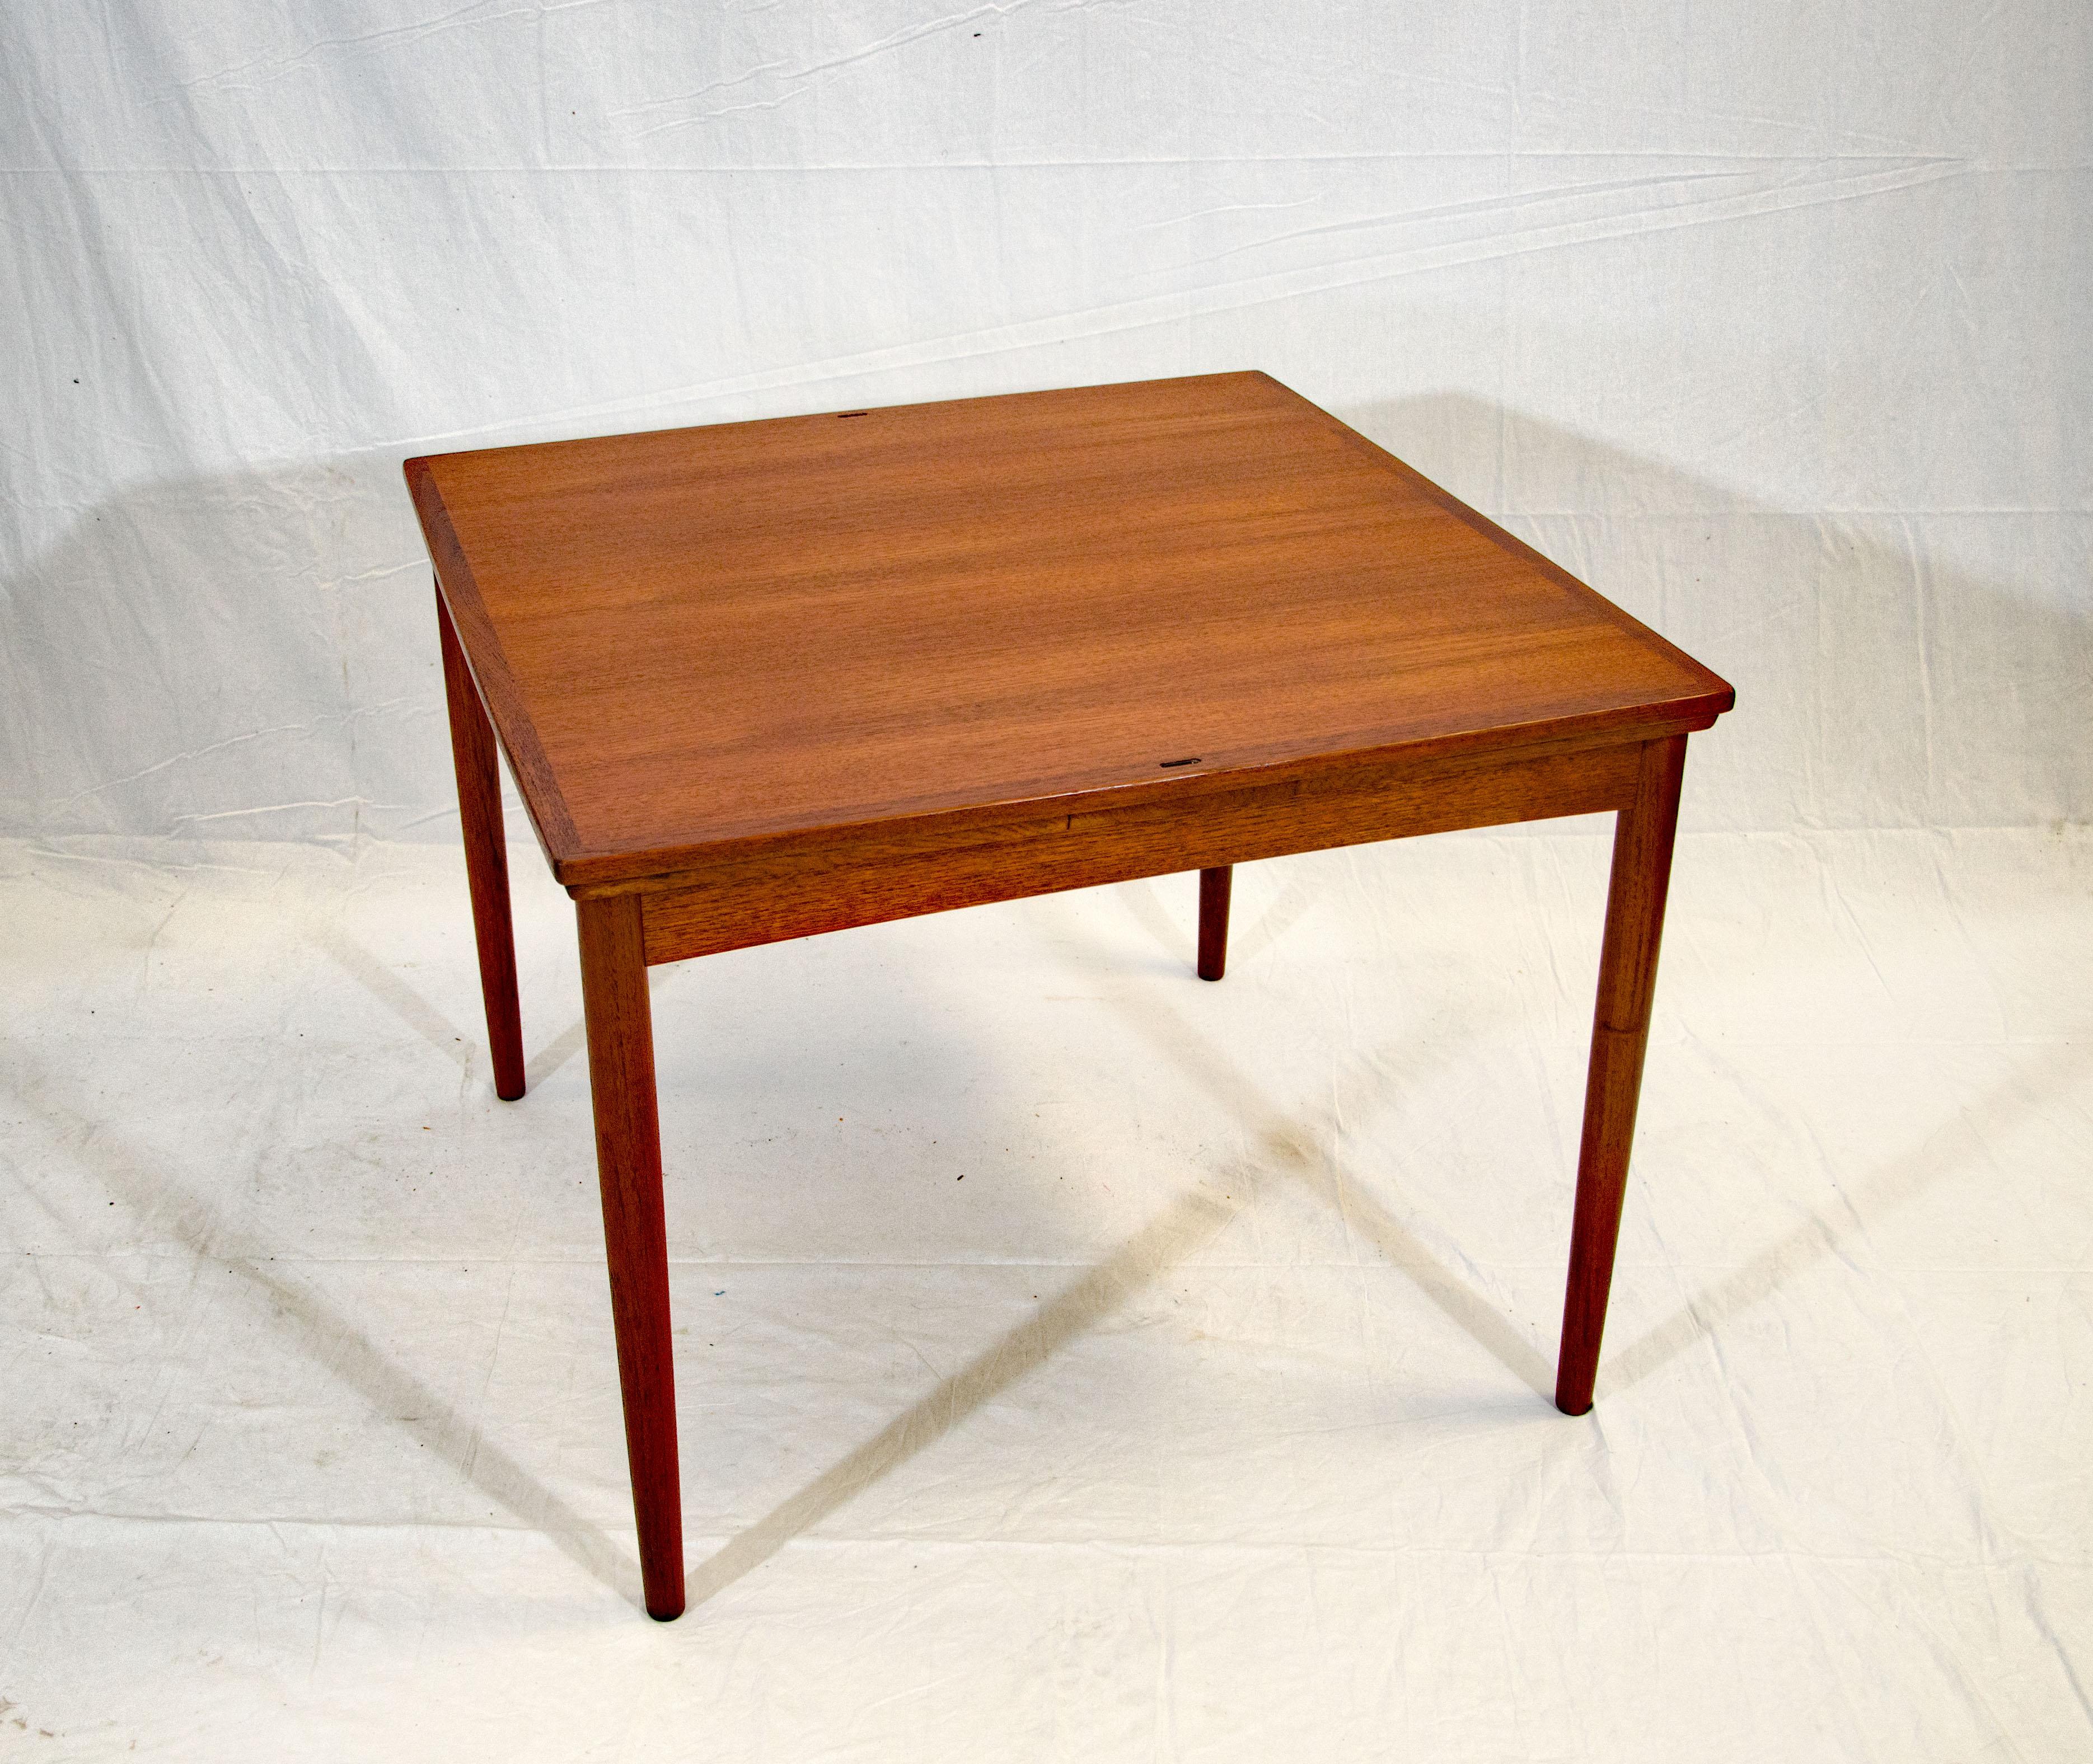 Nice square Danish teak card or game table that also has two small 13